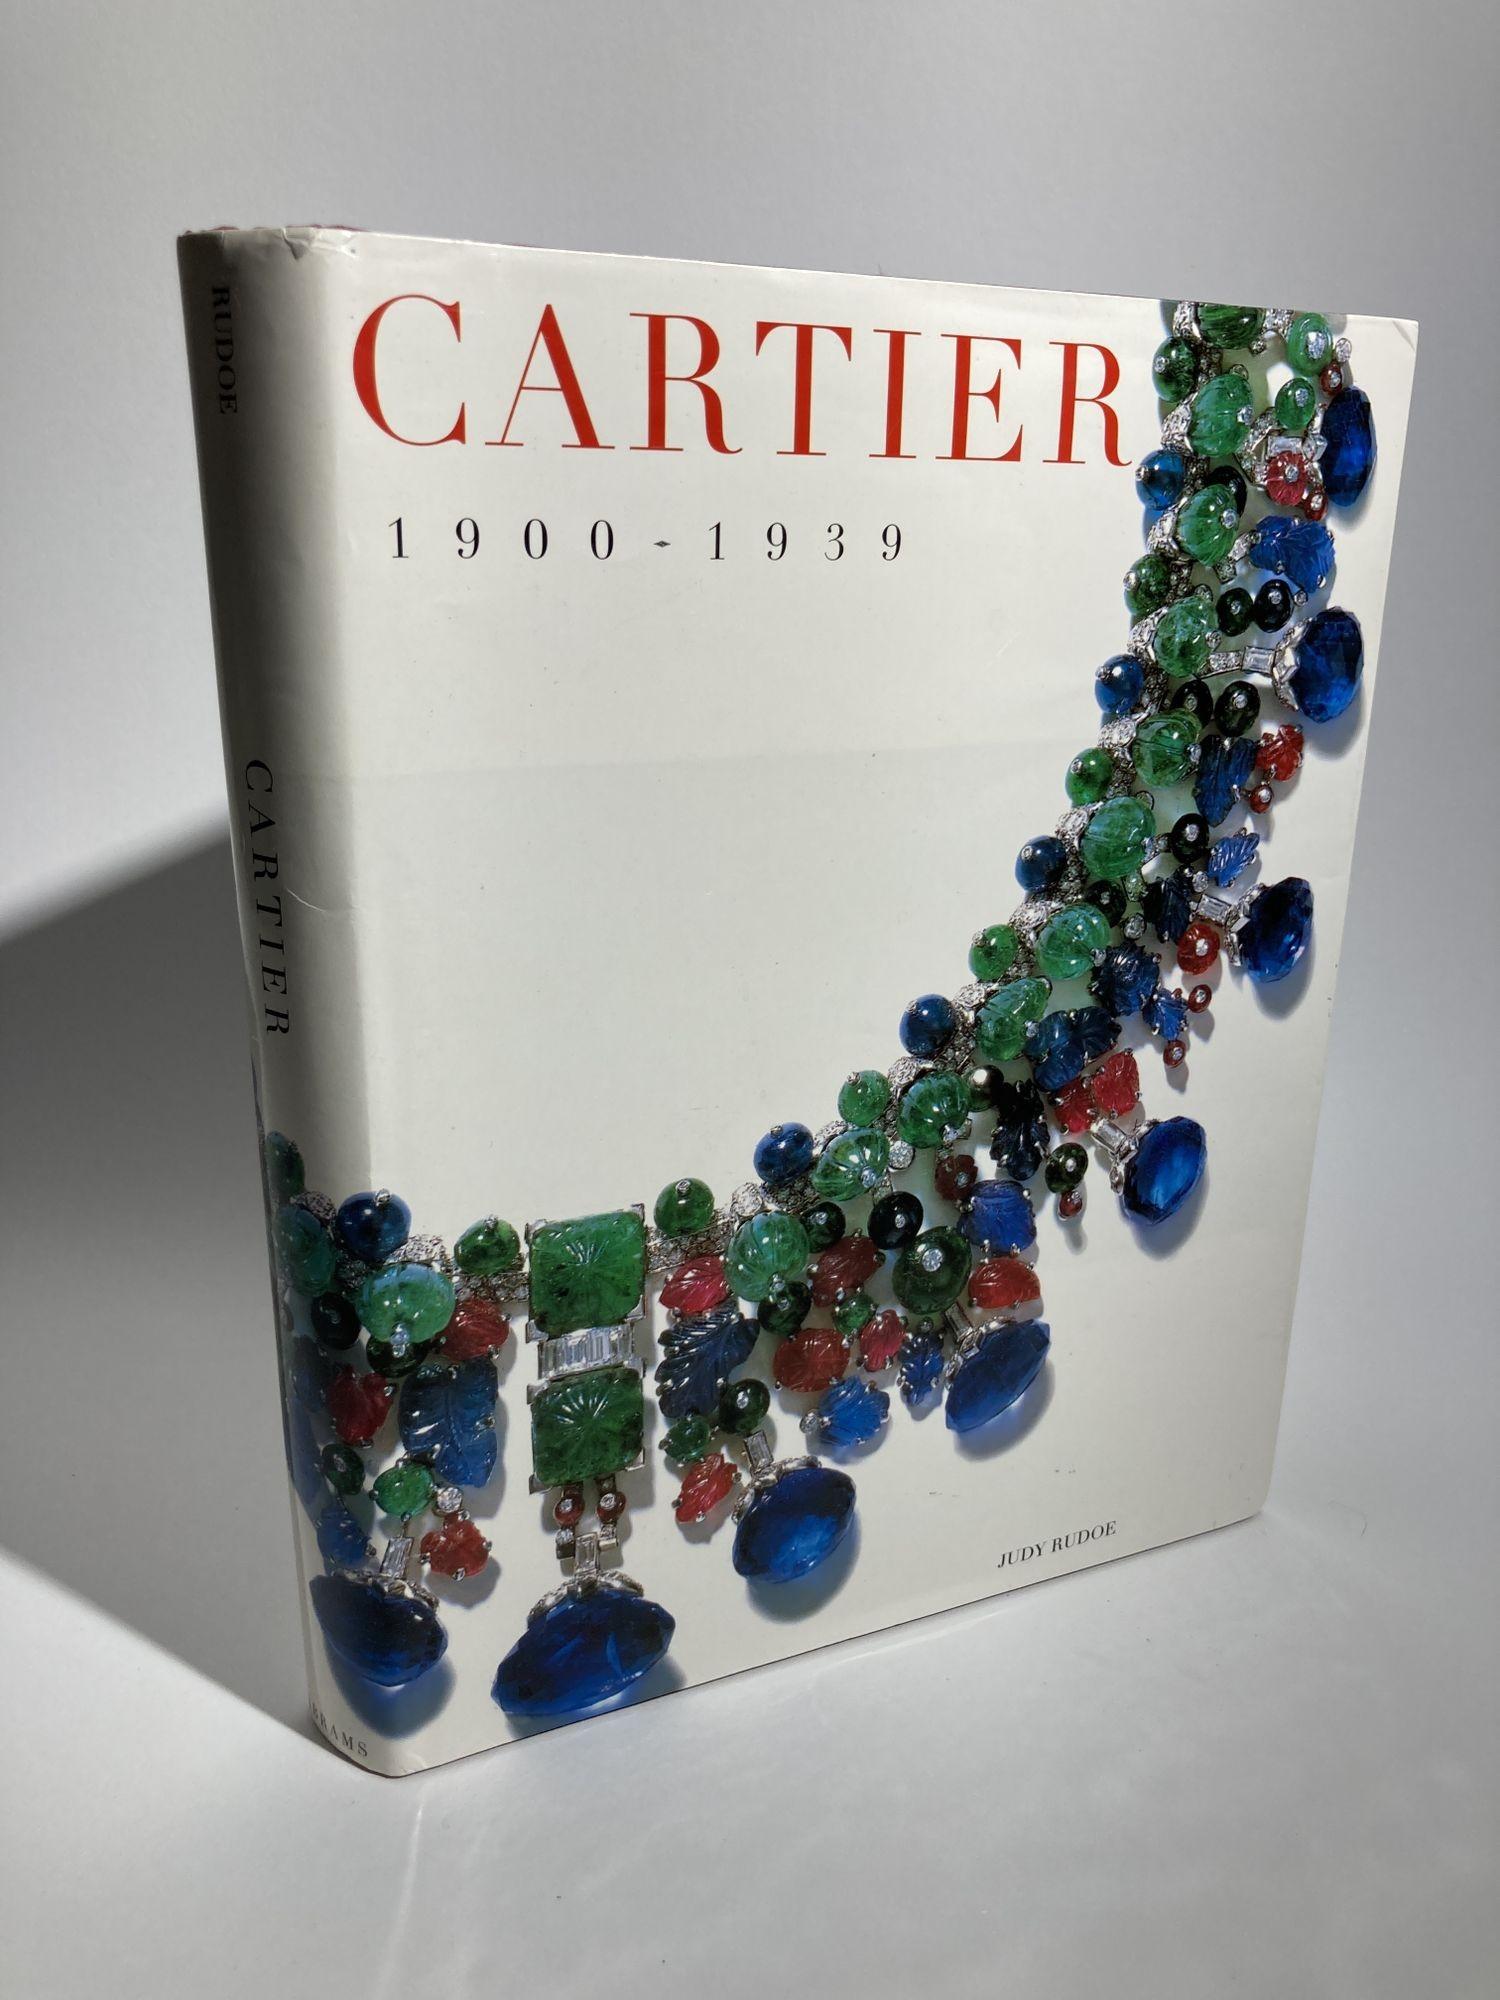 Cartier 1900 to 1939 Hardcover Book 10